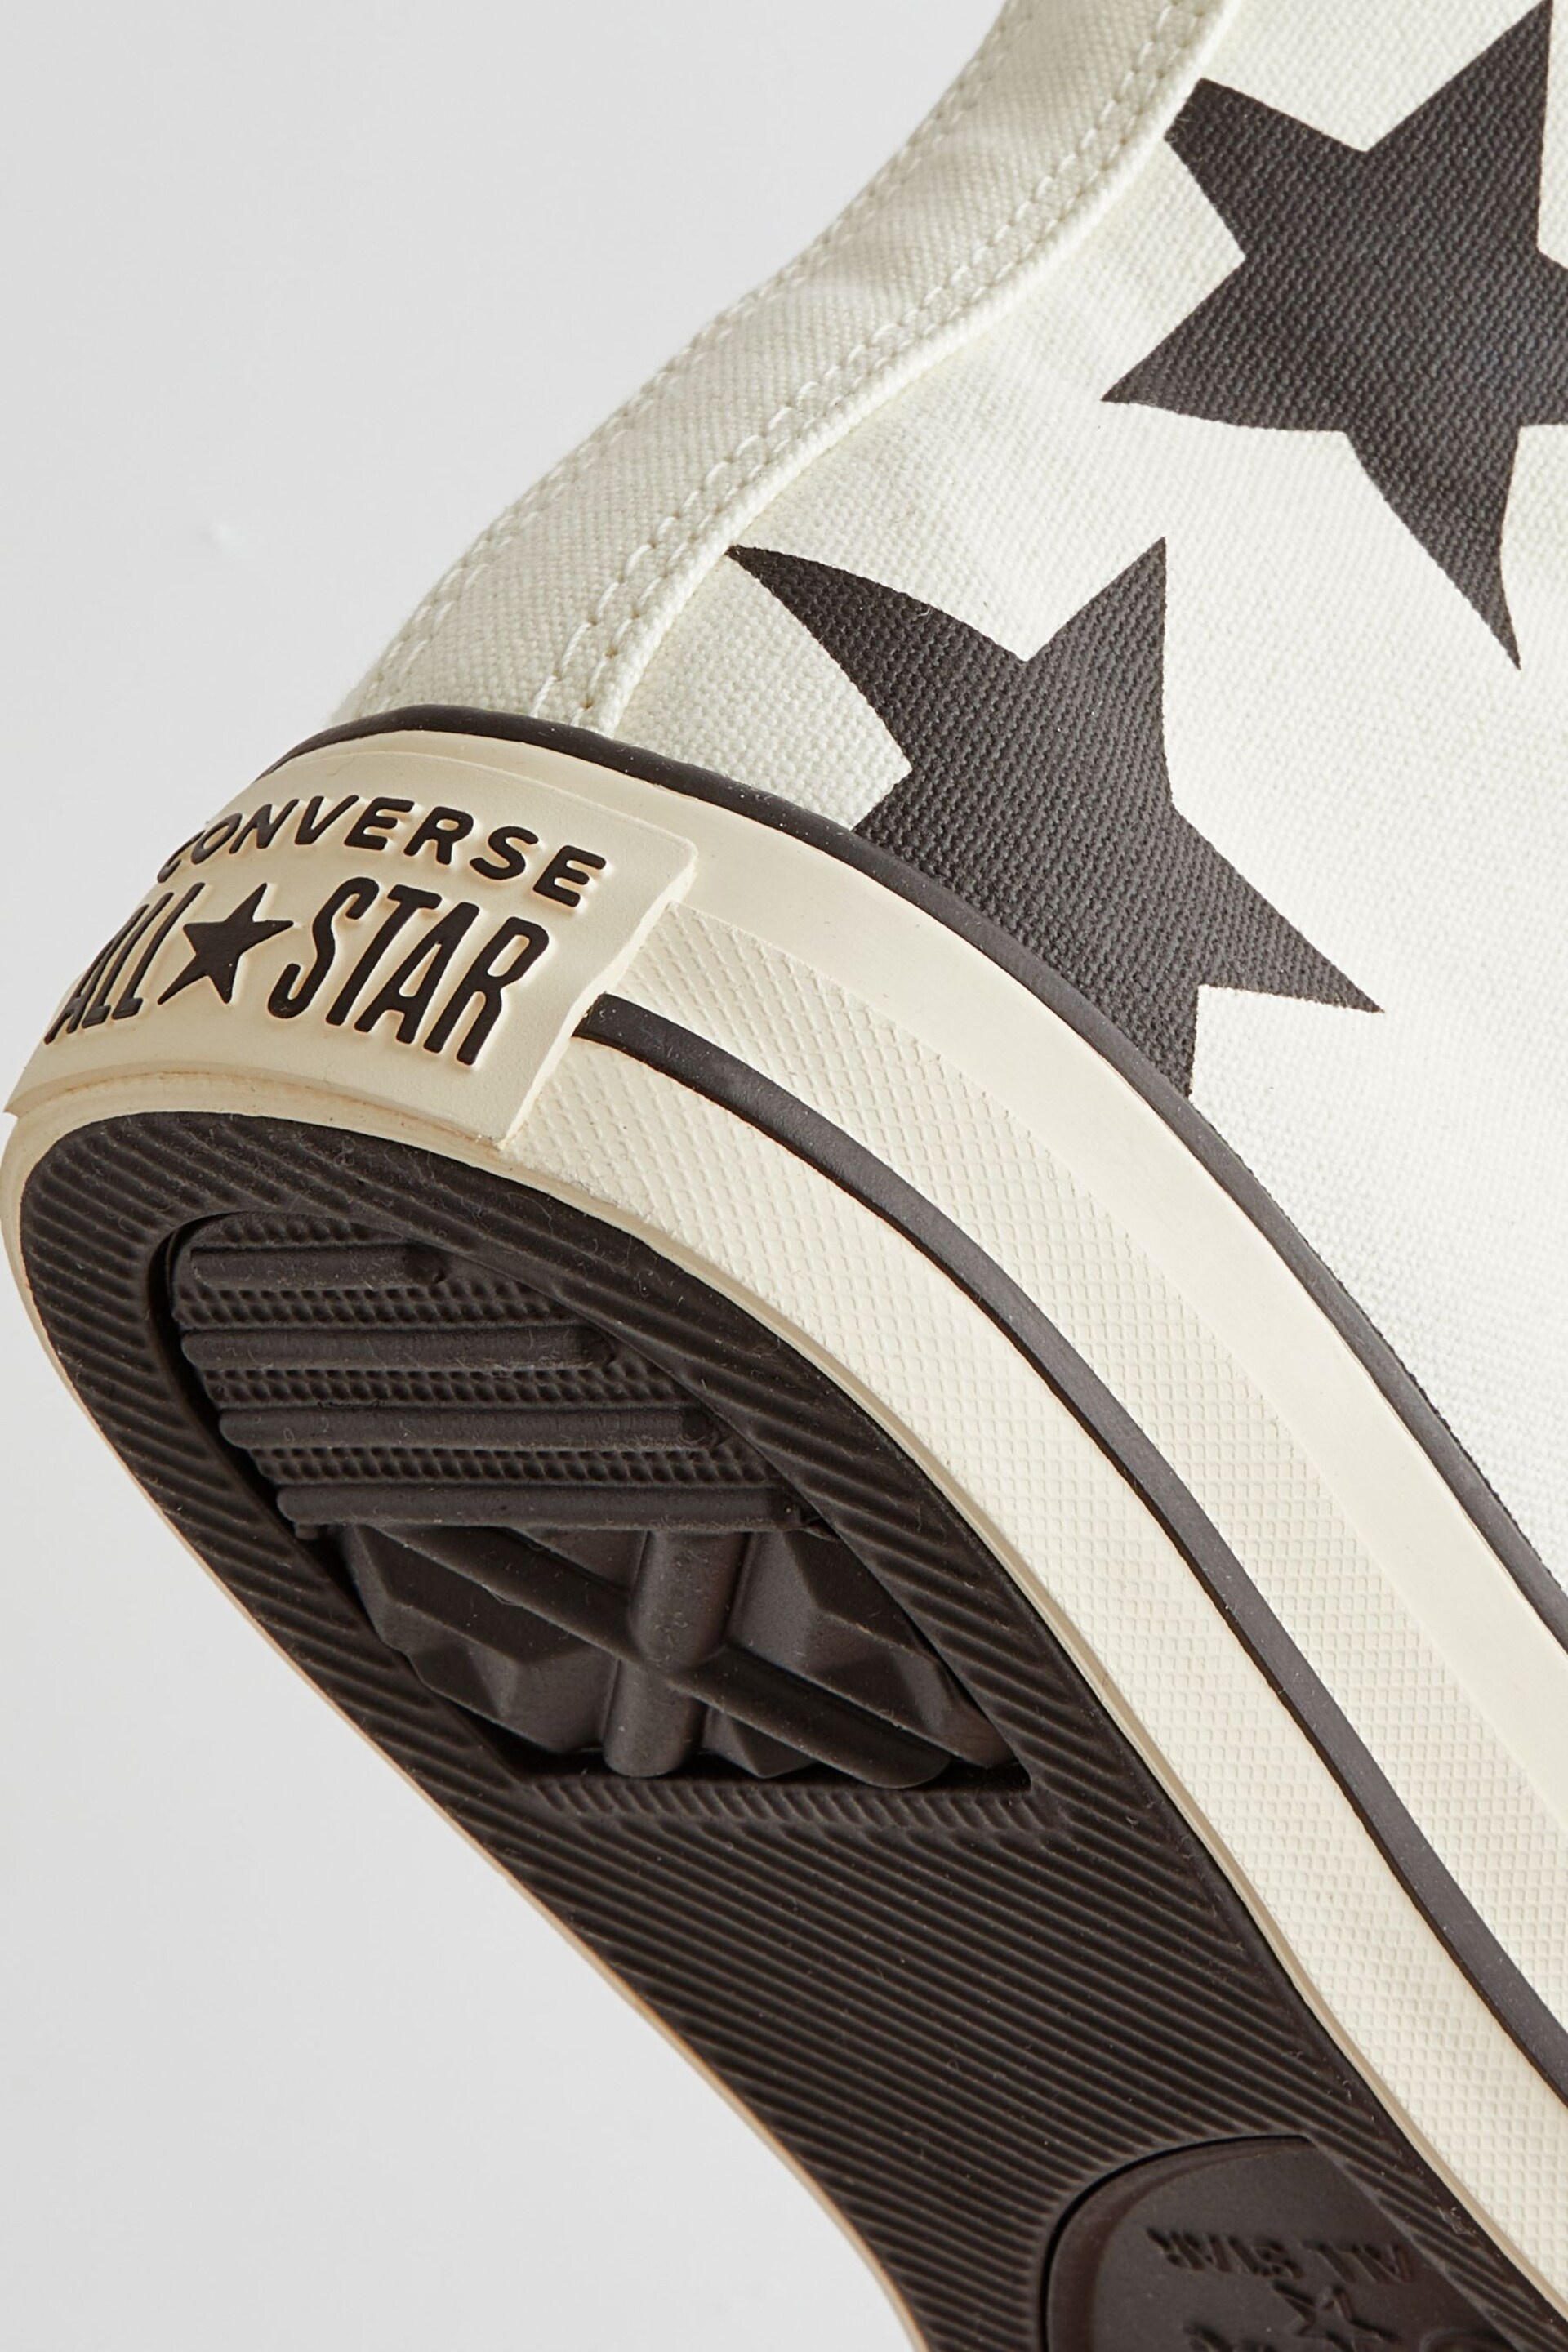 Converse White/Black Chuck Taylor All Star Lift Star Print Trainers - Image 7 of 9